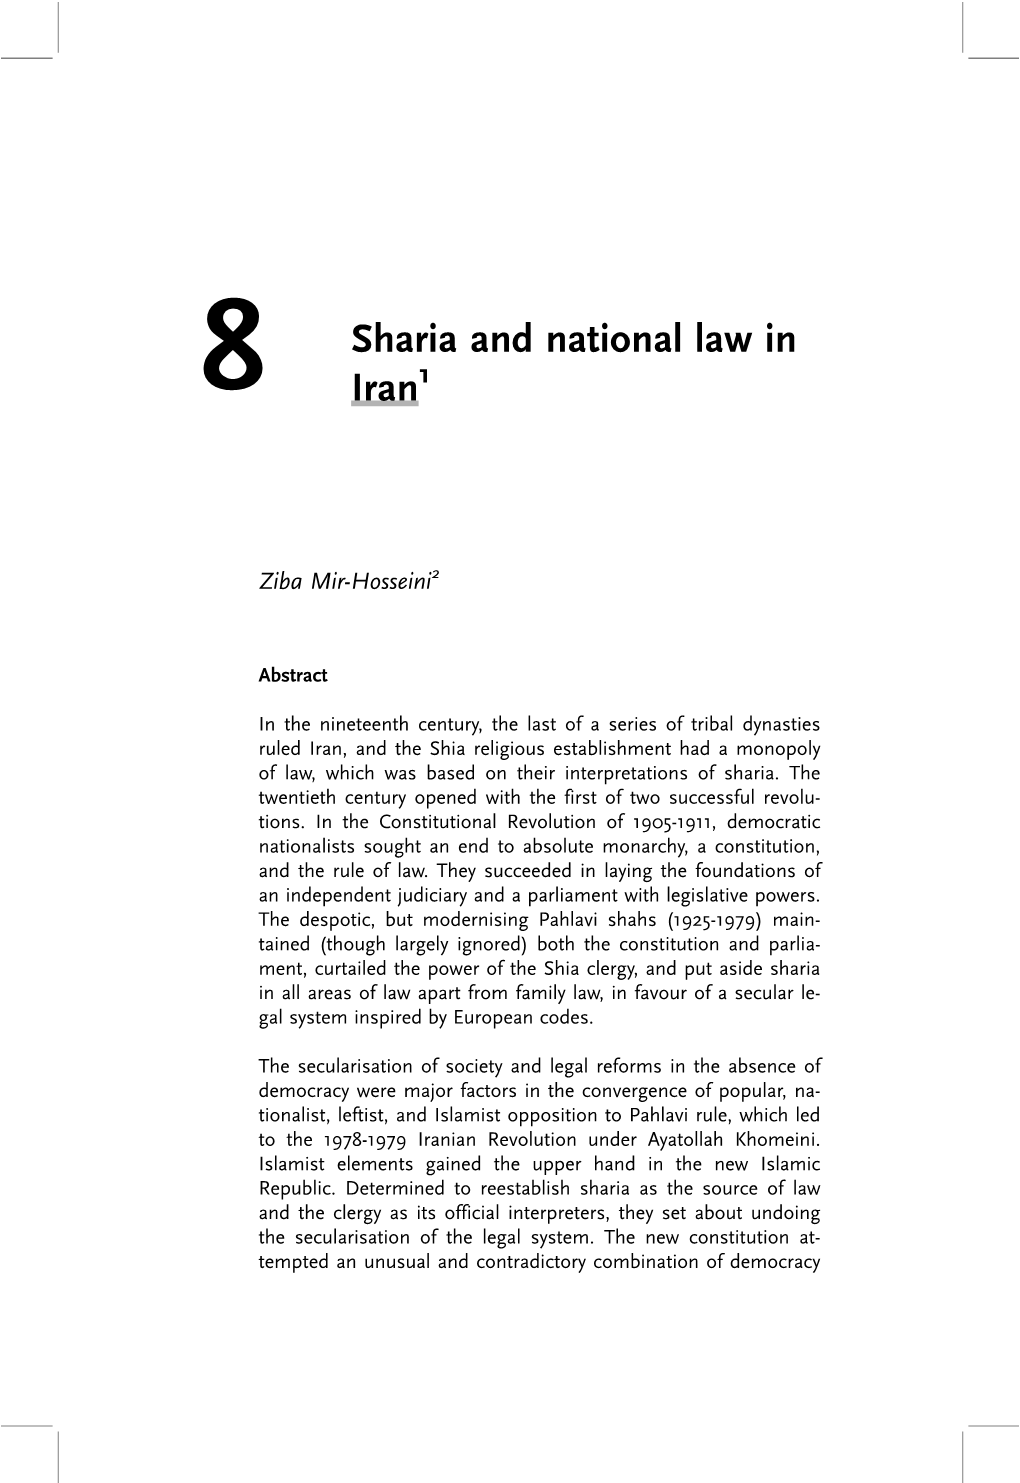 8 Sharia and National Law in Iran